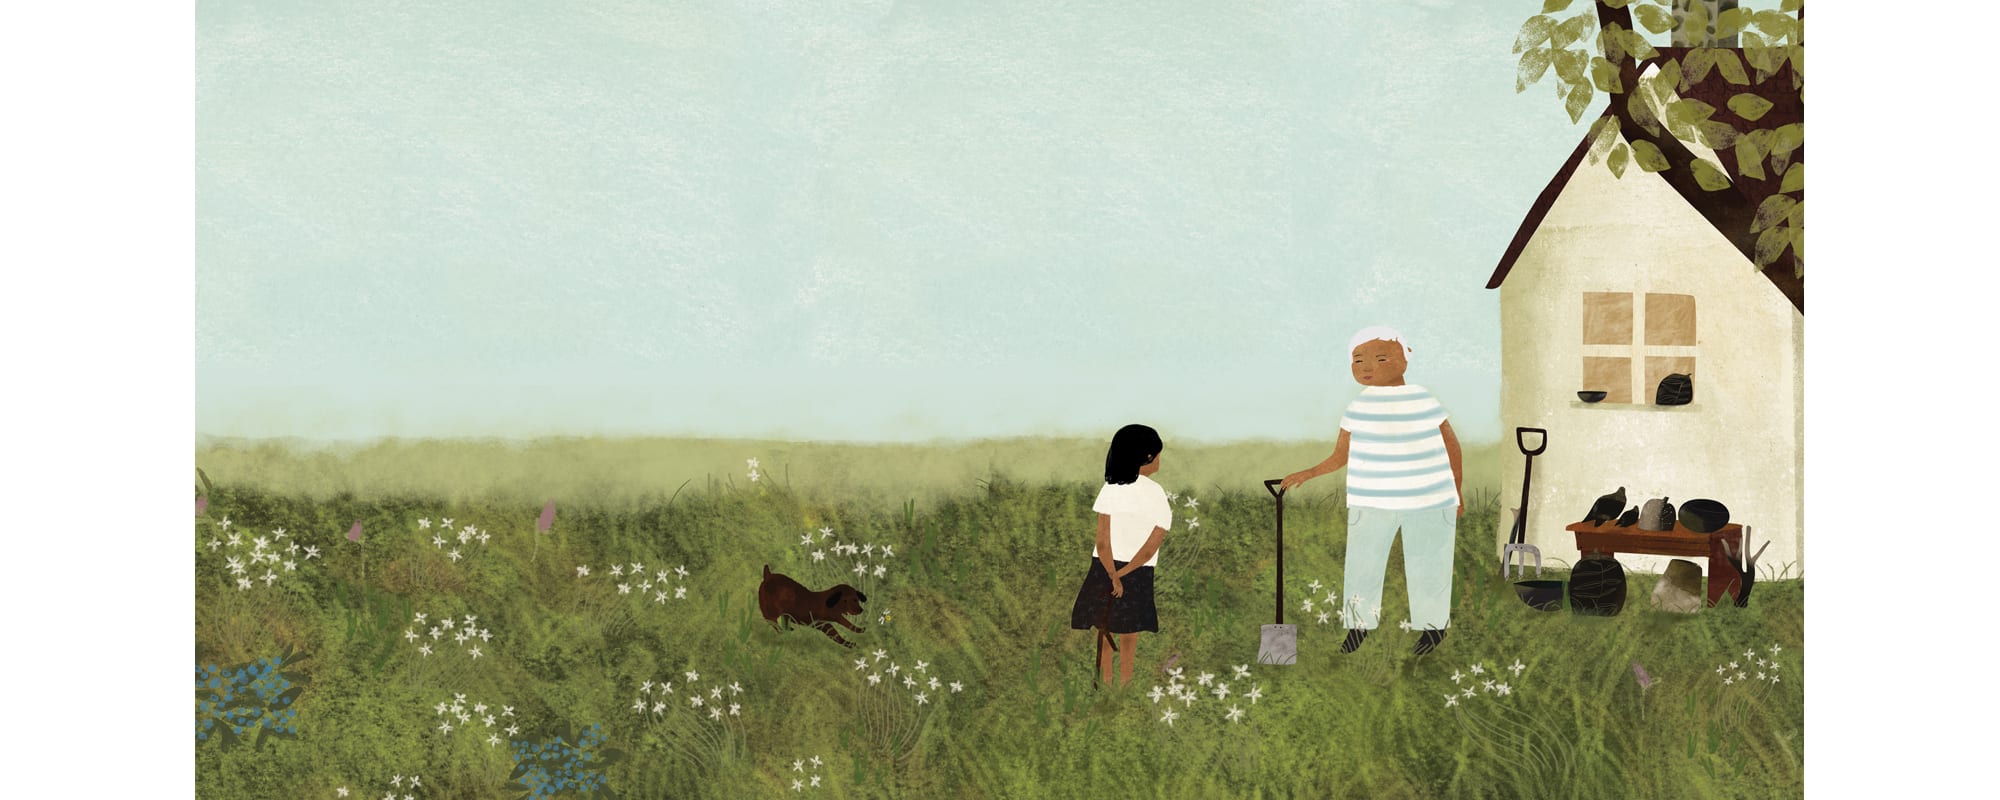 An illustration by Julie Flett of a young girl and an old woman in a field beside a small building